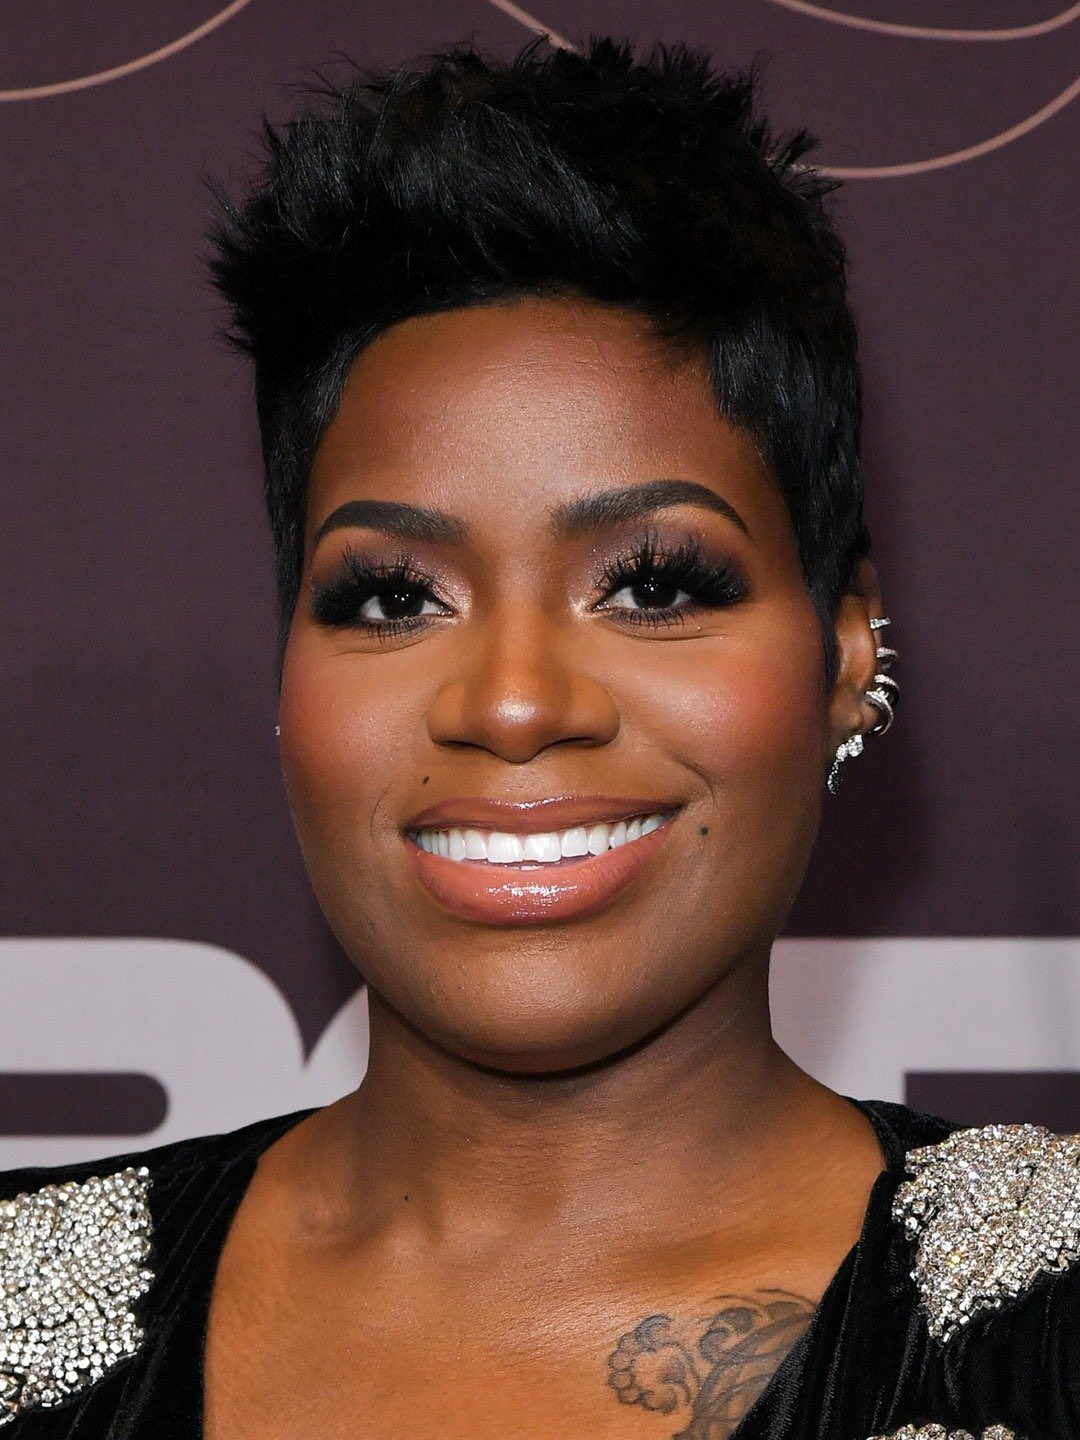 Wishing a Happy 36th Birthday to Fantasia Barrino  . What s your favorite Fantasia song?  